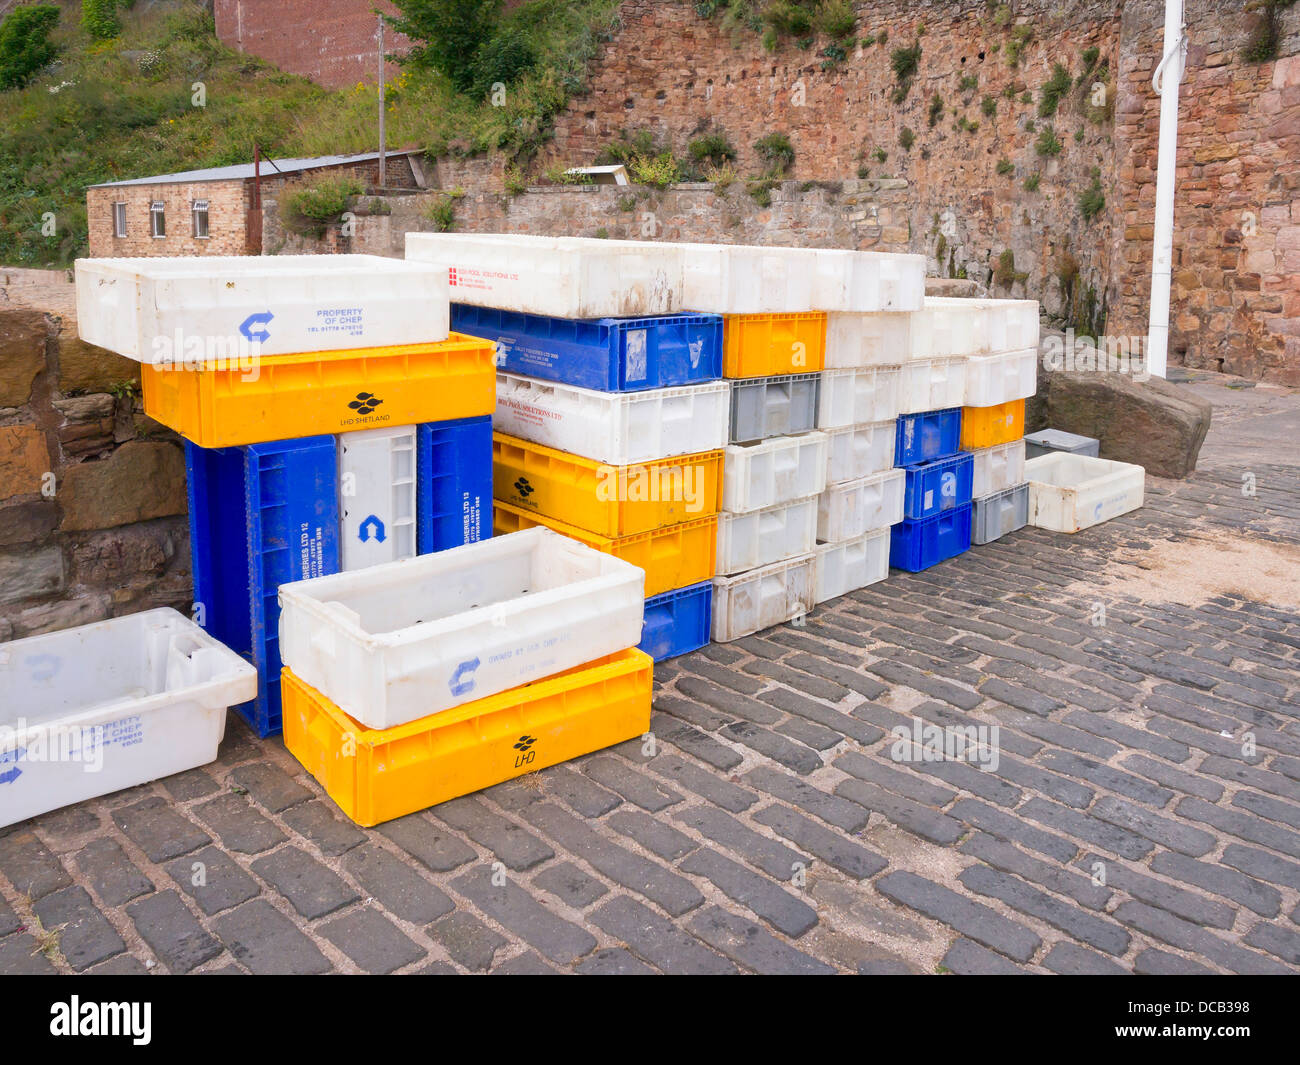 https://c8.alamy.com/comp/DCB398/empty-fish-boxes-ready-for-use-on-the-harbour-wall-in-the-village-DCB398.jpg